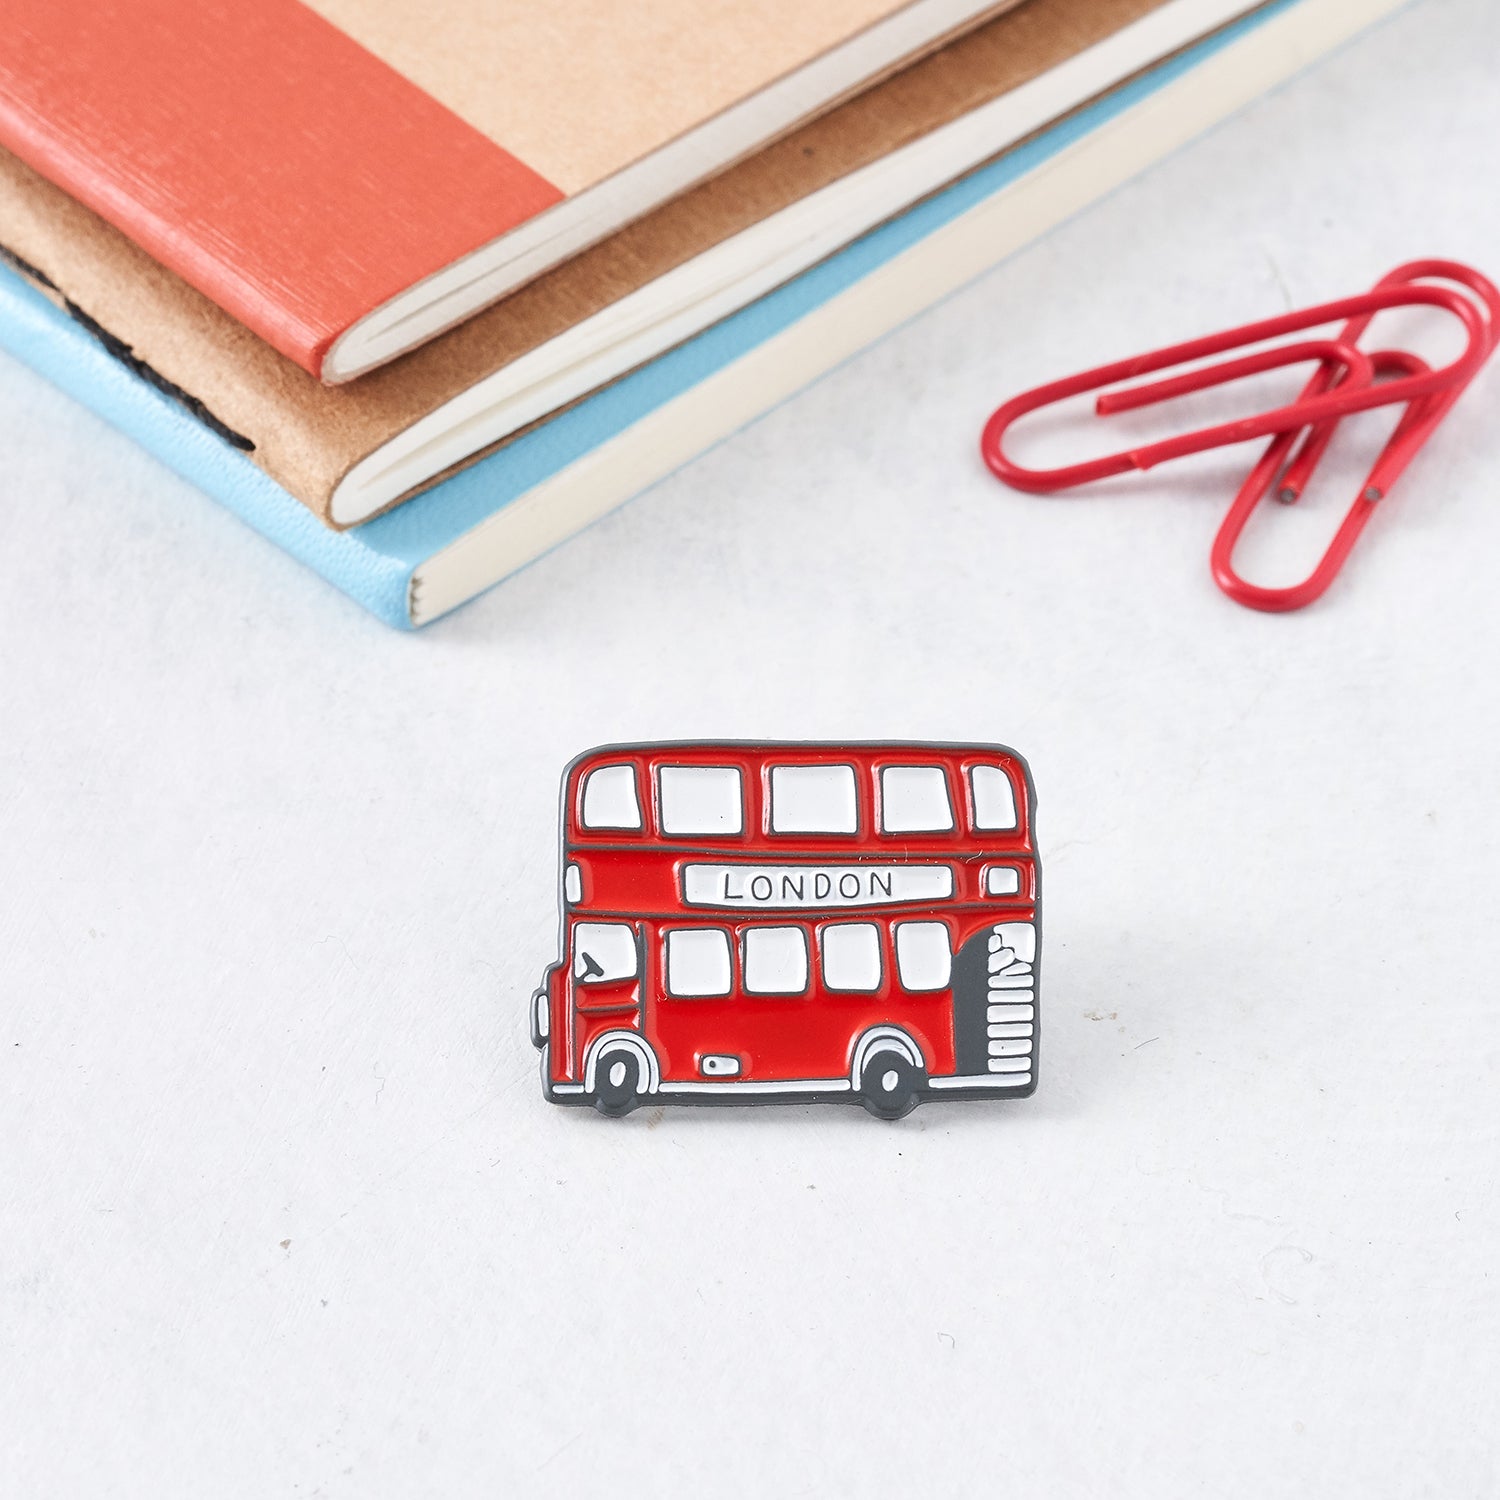 London Red Bus Enamel Pin Badge by Victoria Eggs 2